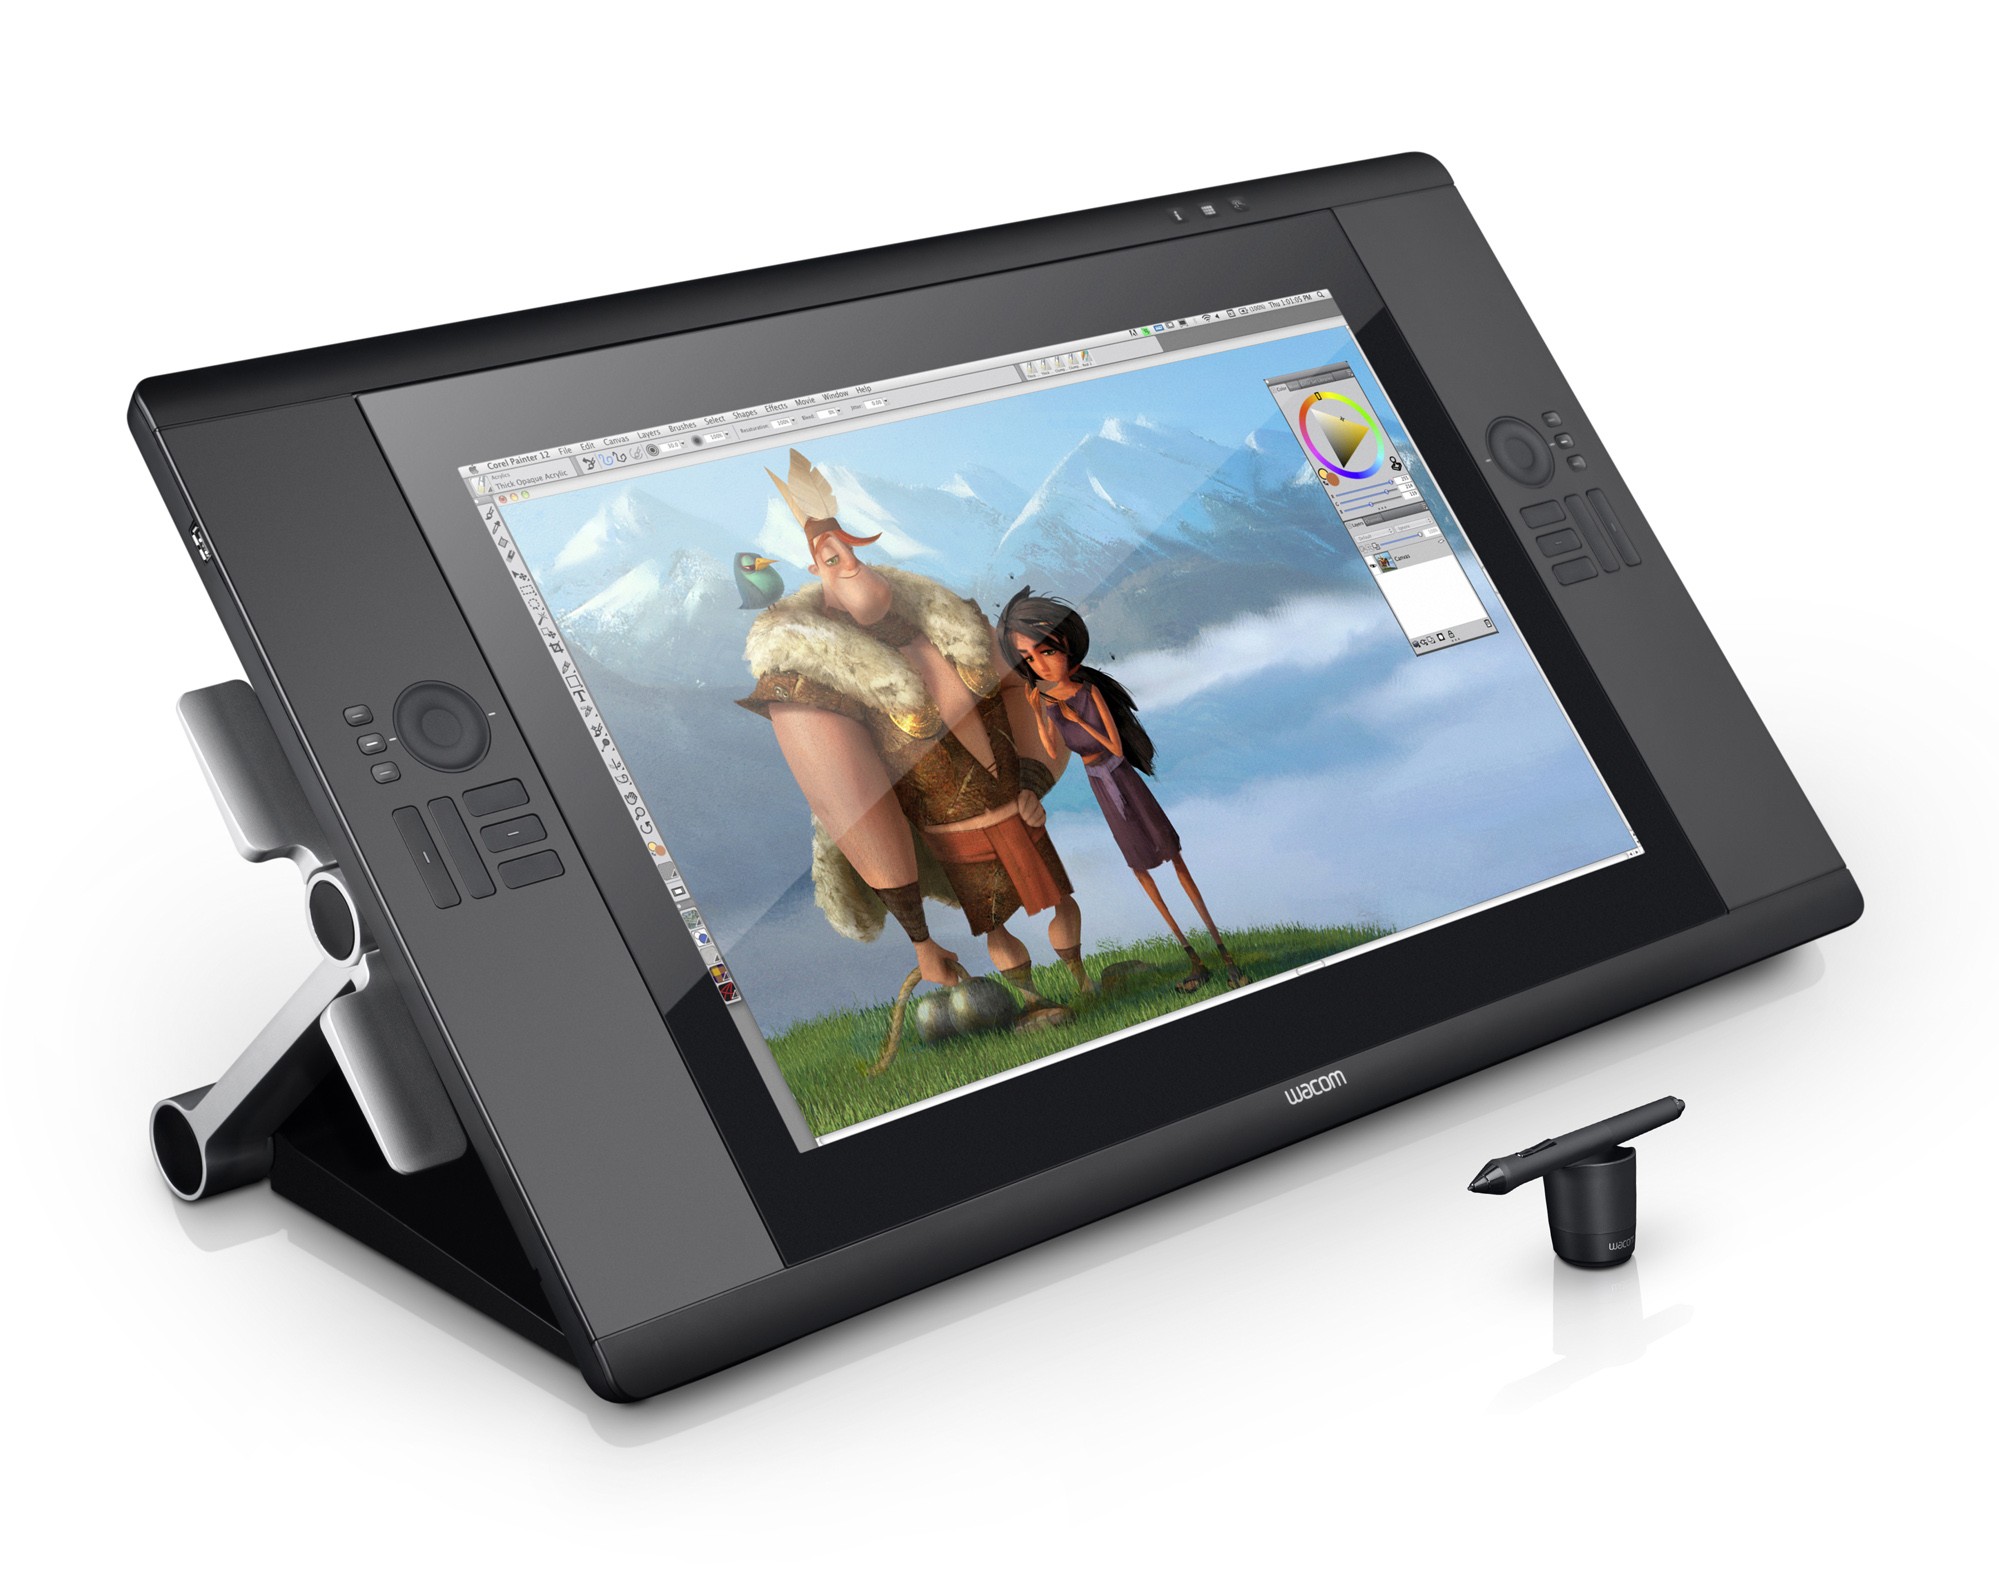 http://store.tabletpc.com.au/96/images/wacom/dth2400hd_rightview_rgb_s.jpg